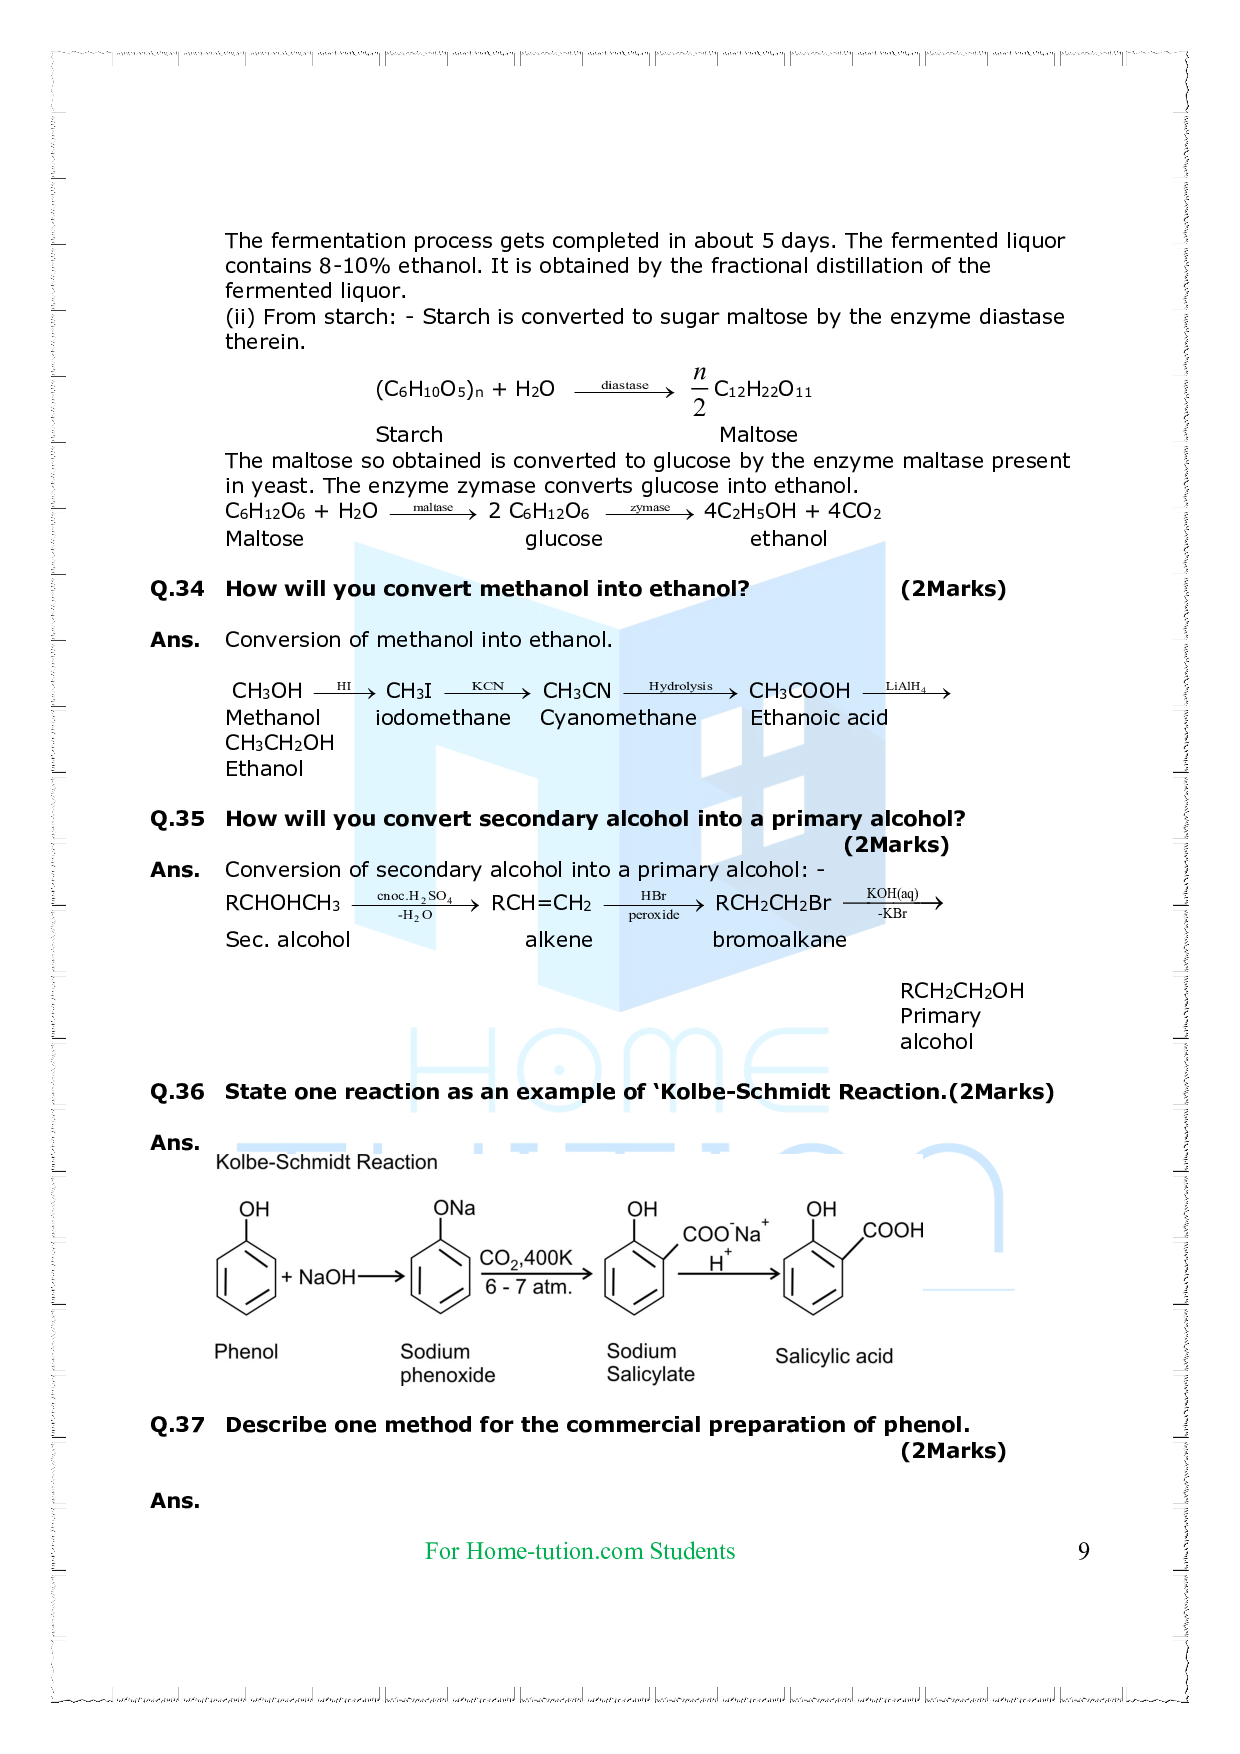 Chapter 11 Alcohols, Phenols, and Ethers Important Questions